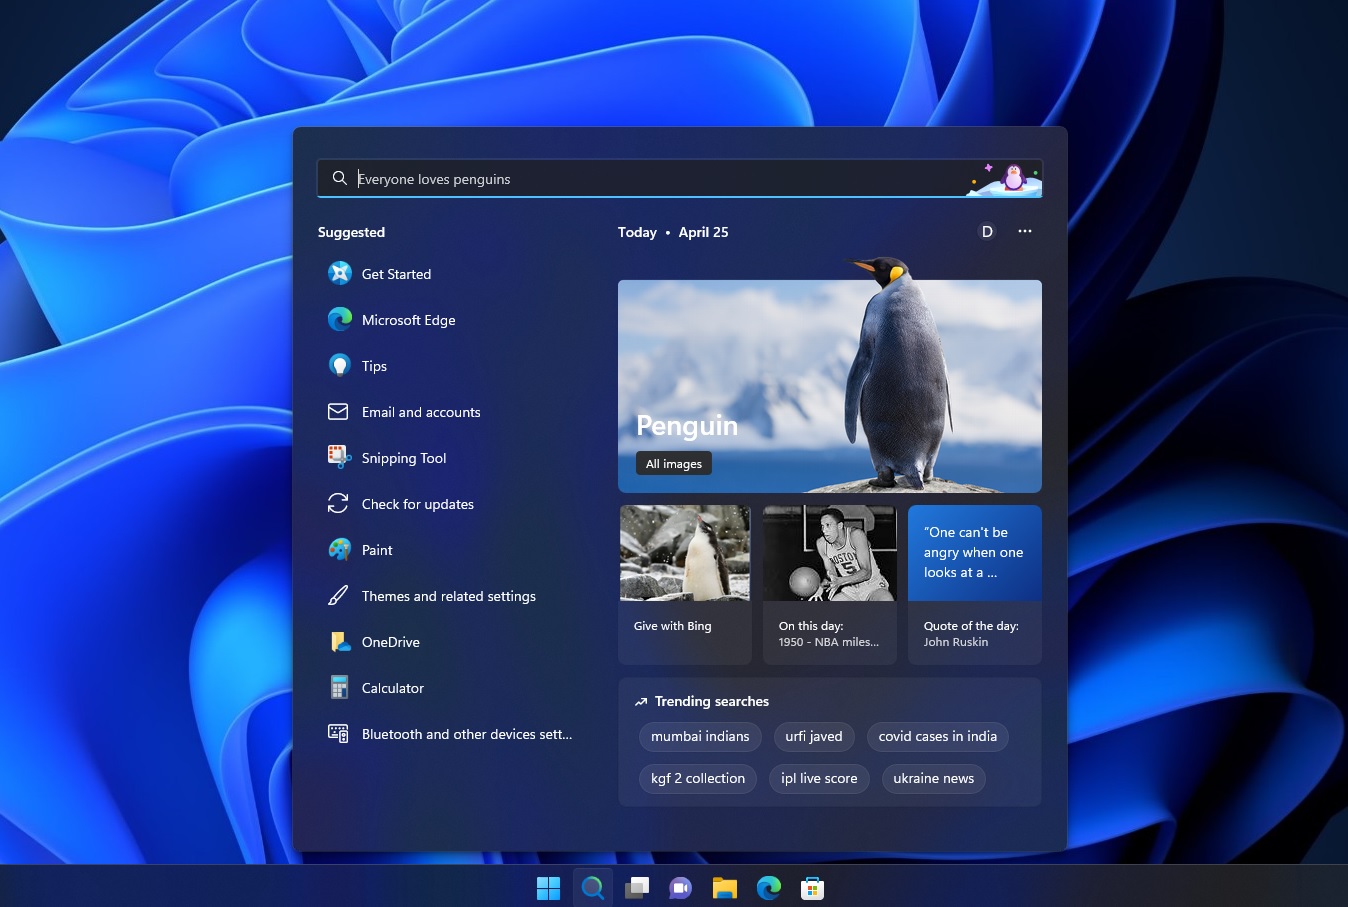 Hands on: Windows 11’s new Search UI is here, but accuracy issues remain a concern